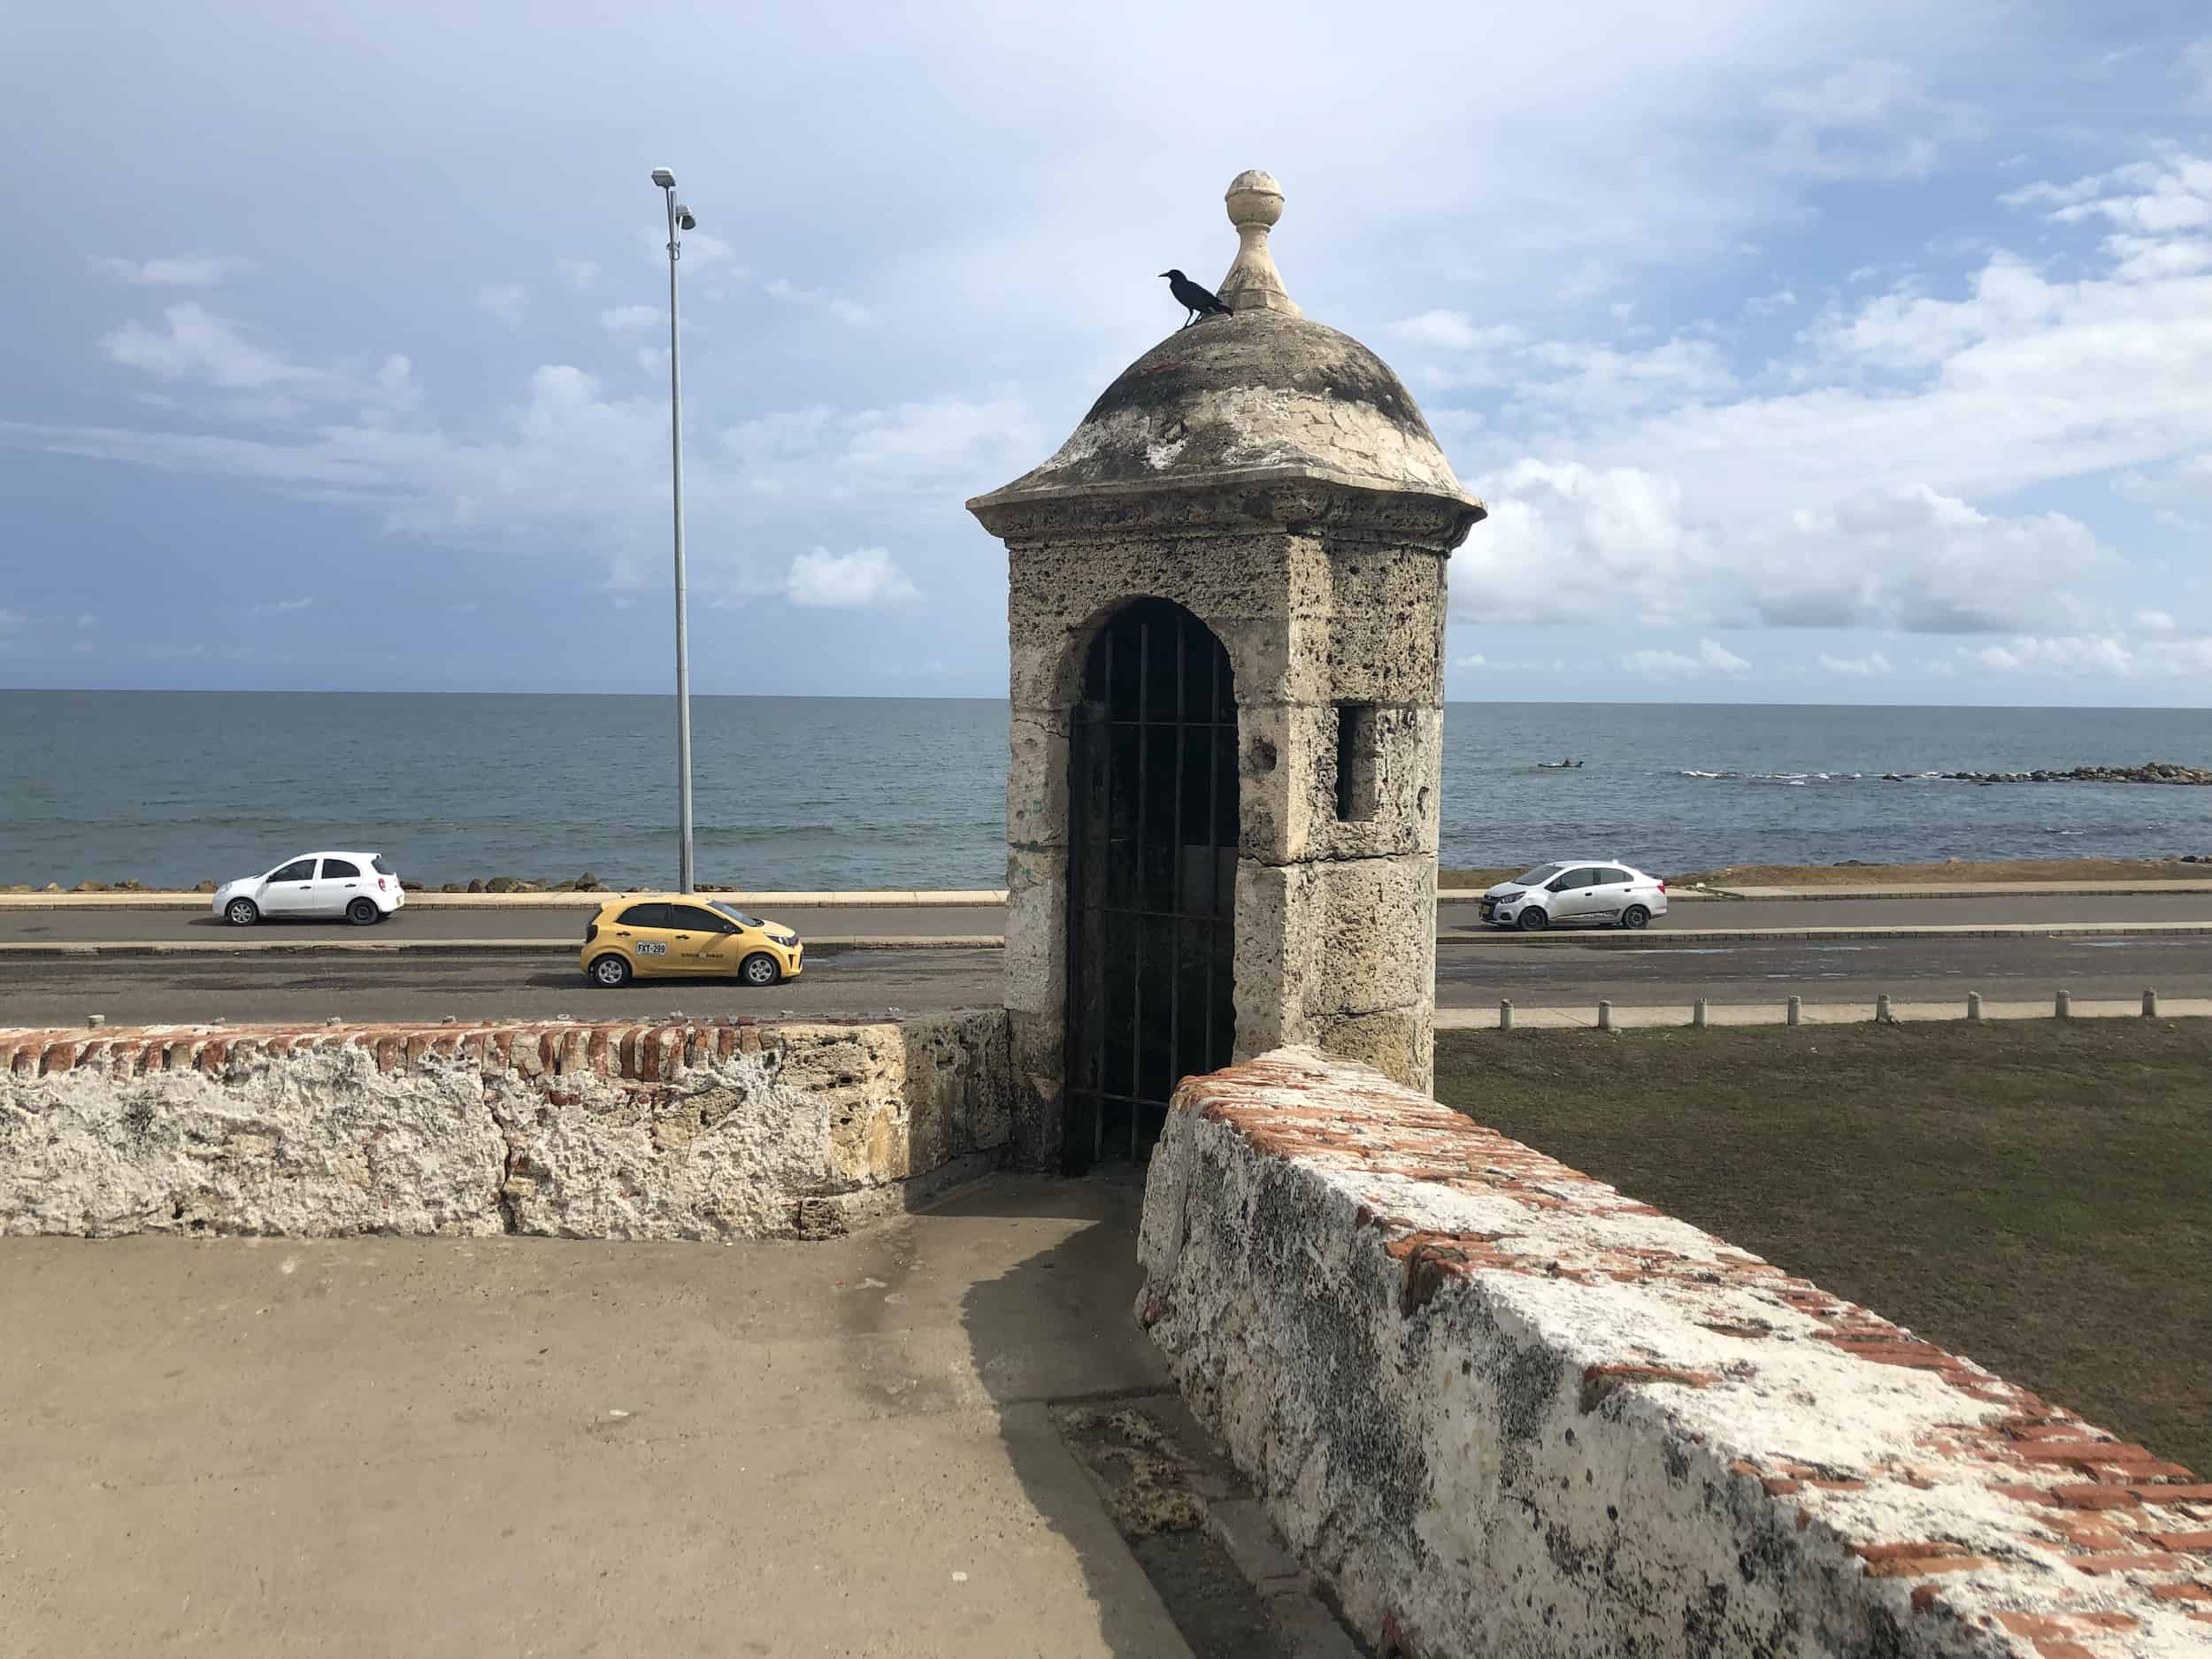 Sentry box on the Bastion of Saint Clare on the Walls of Cartagena, Colombia